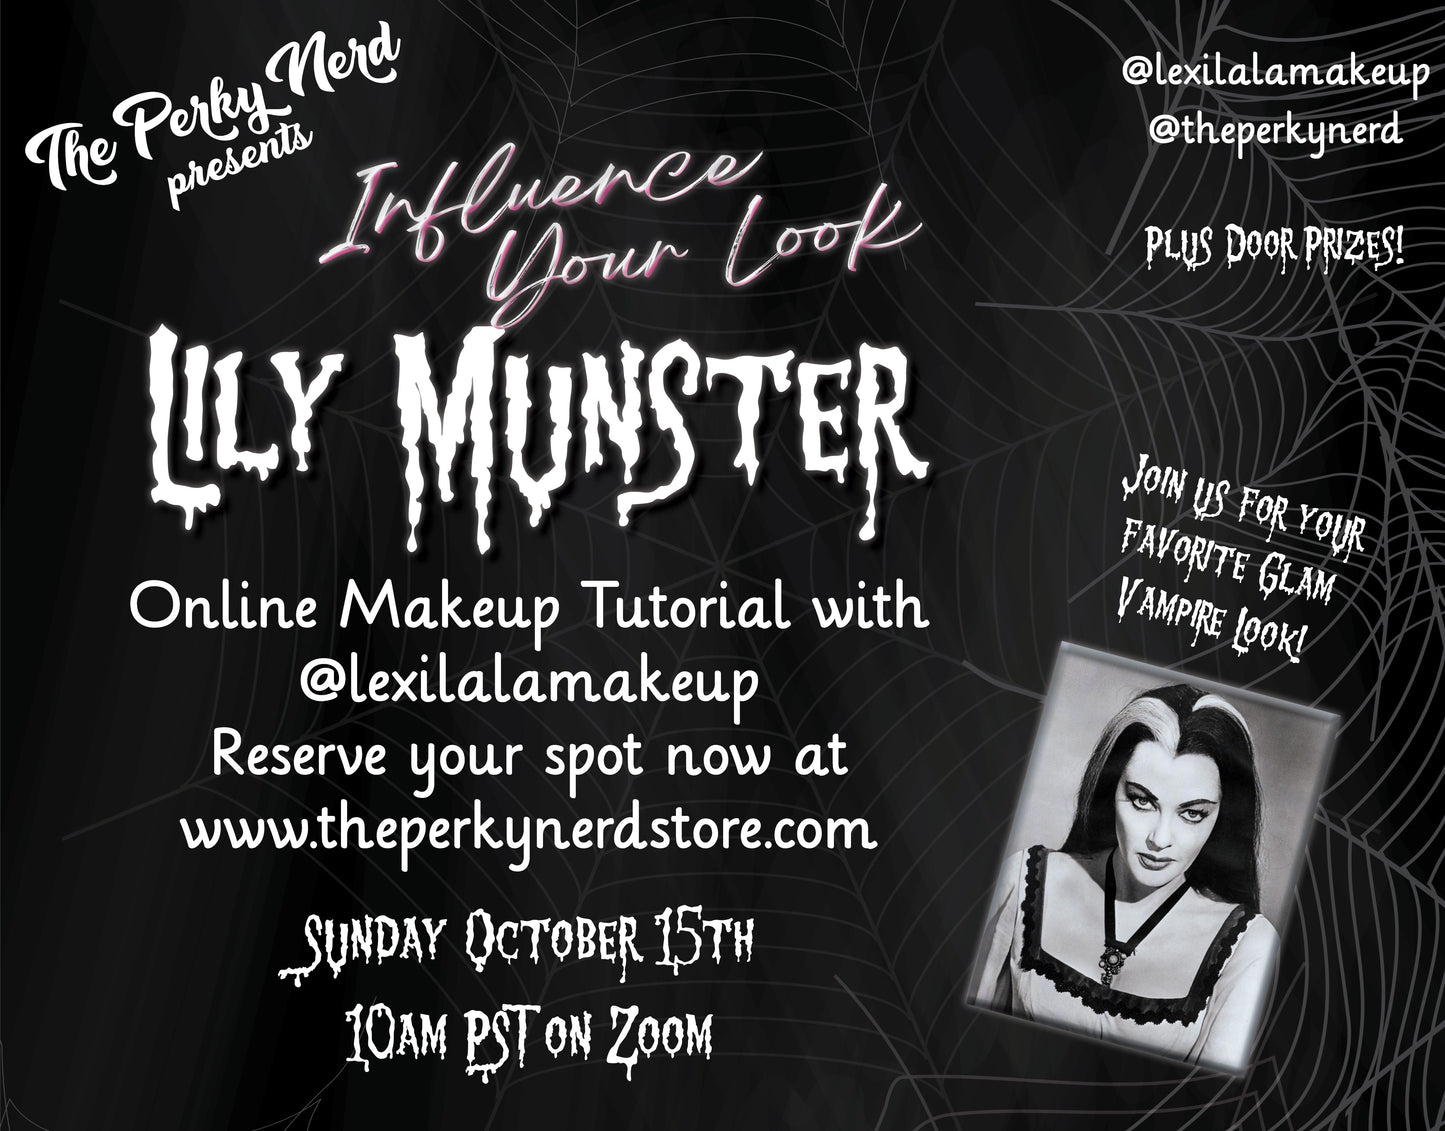 Influence Your Look: LILY MUNSTER Edition - a Makeup Workshop - Oct 15th 10am PST on ZOOM